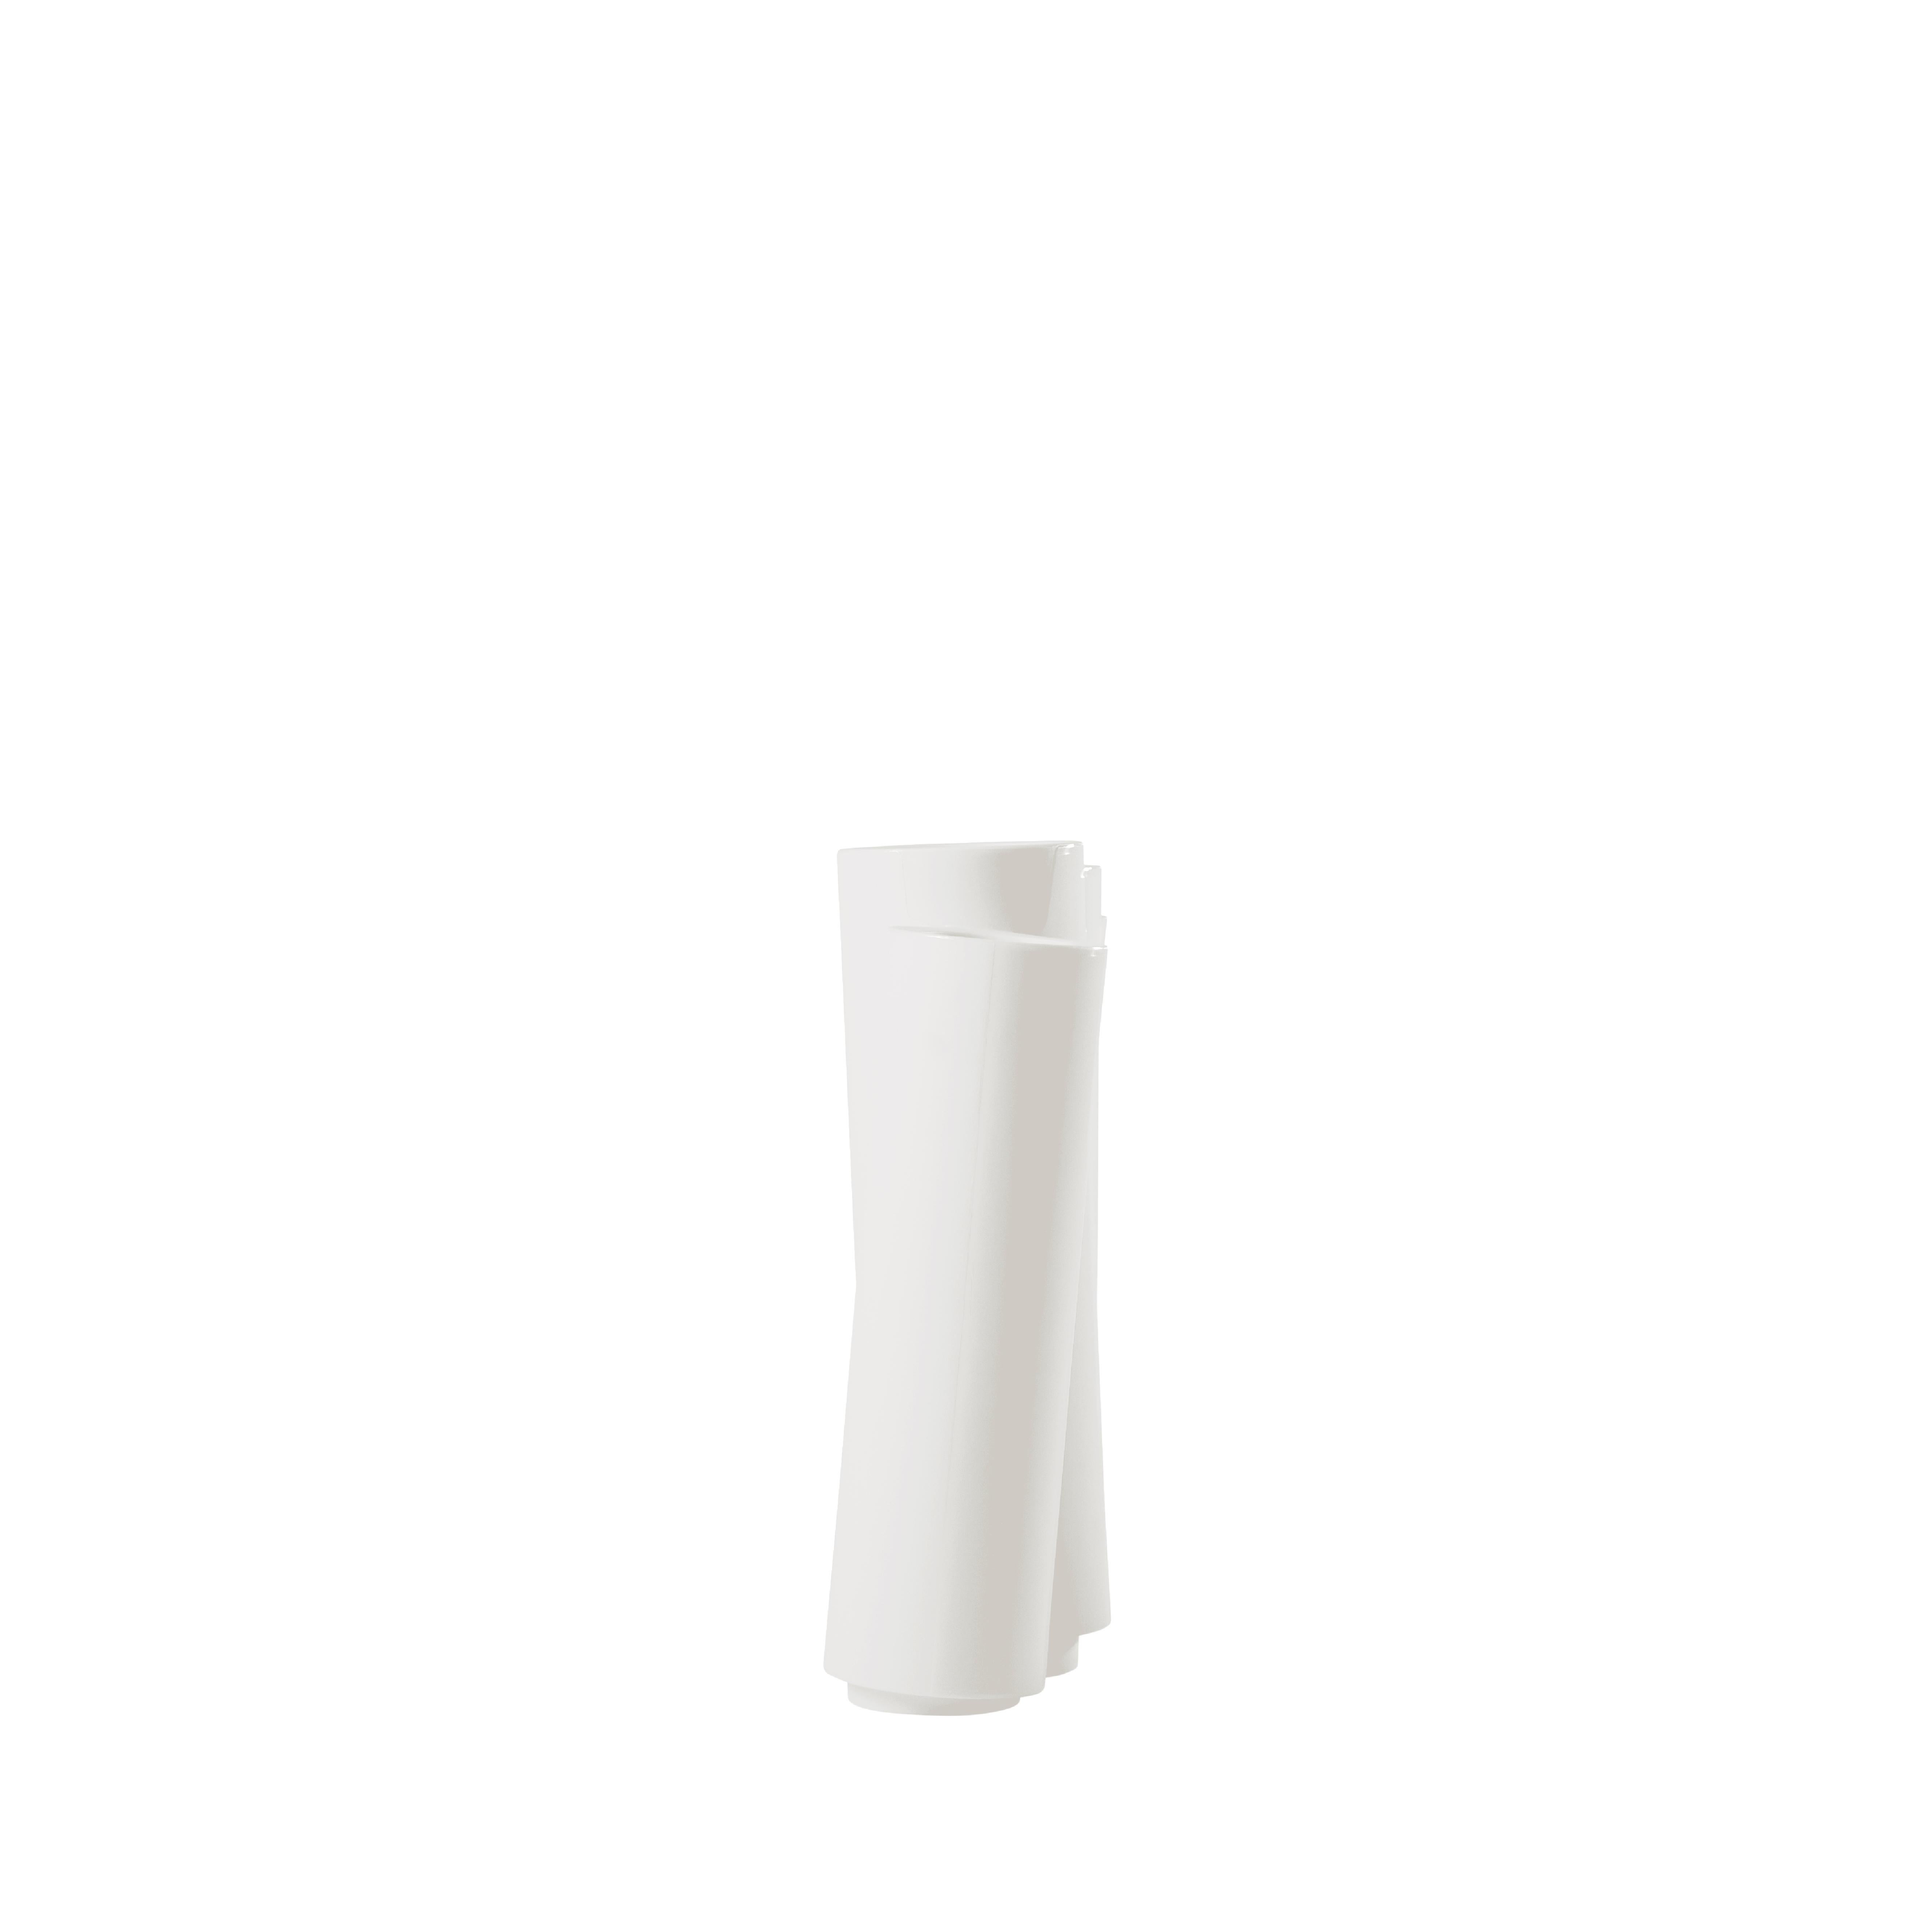 Italian Slide Design Bamboo Cachepot in Milky White by Tous Les Trois For Sale